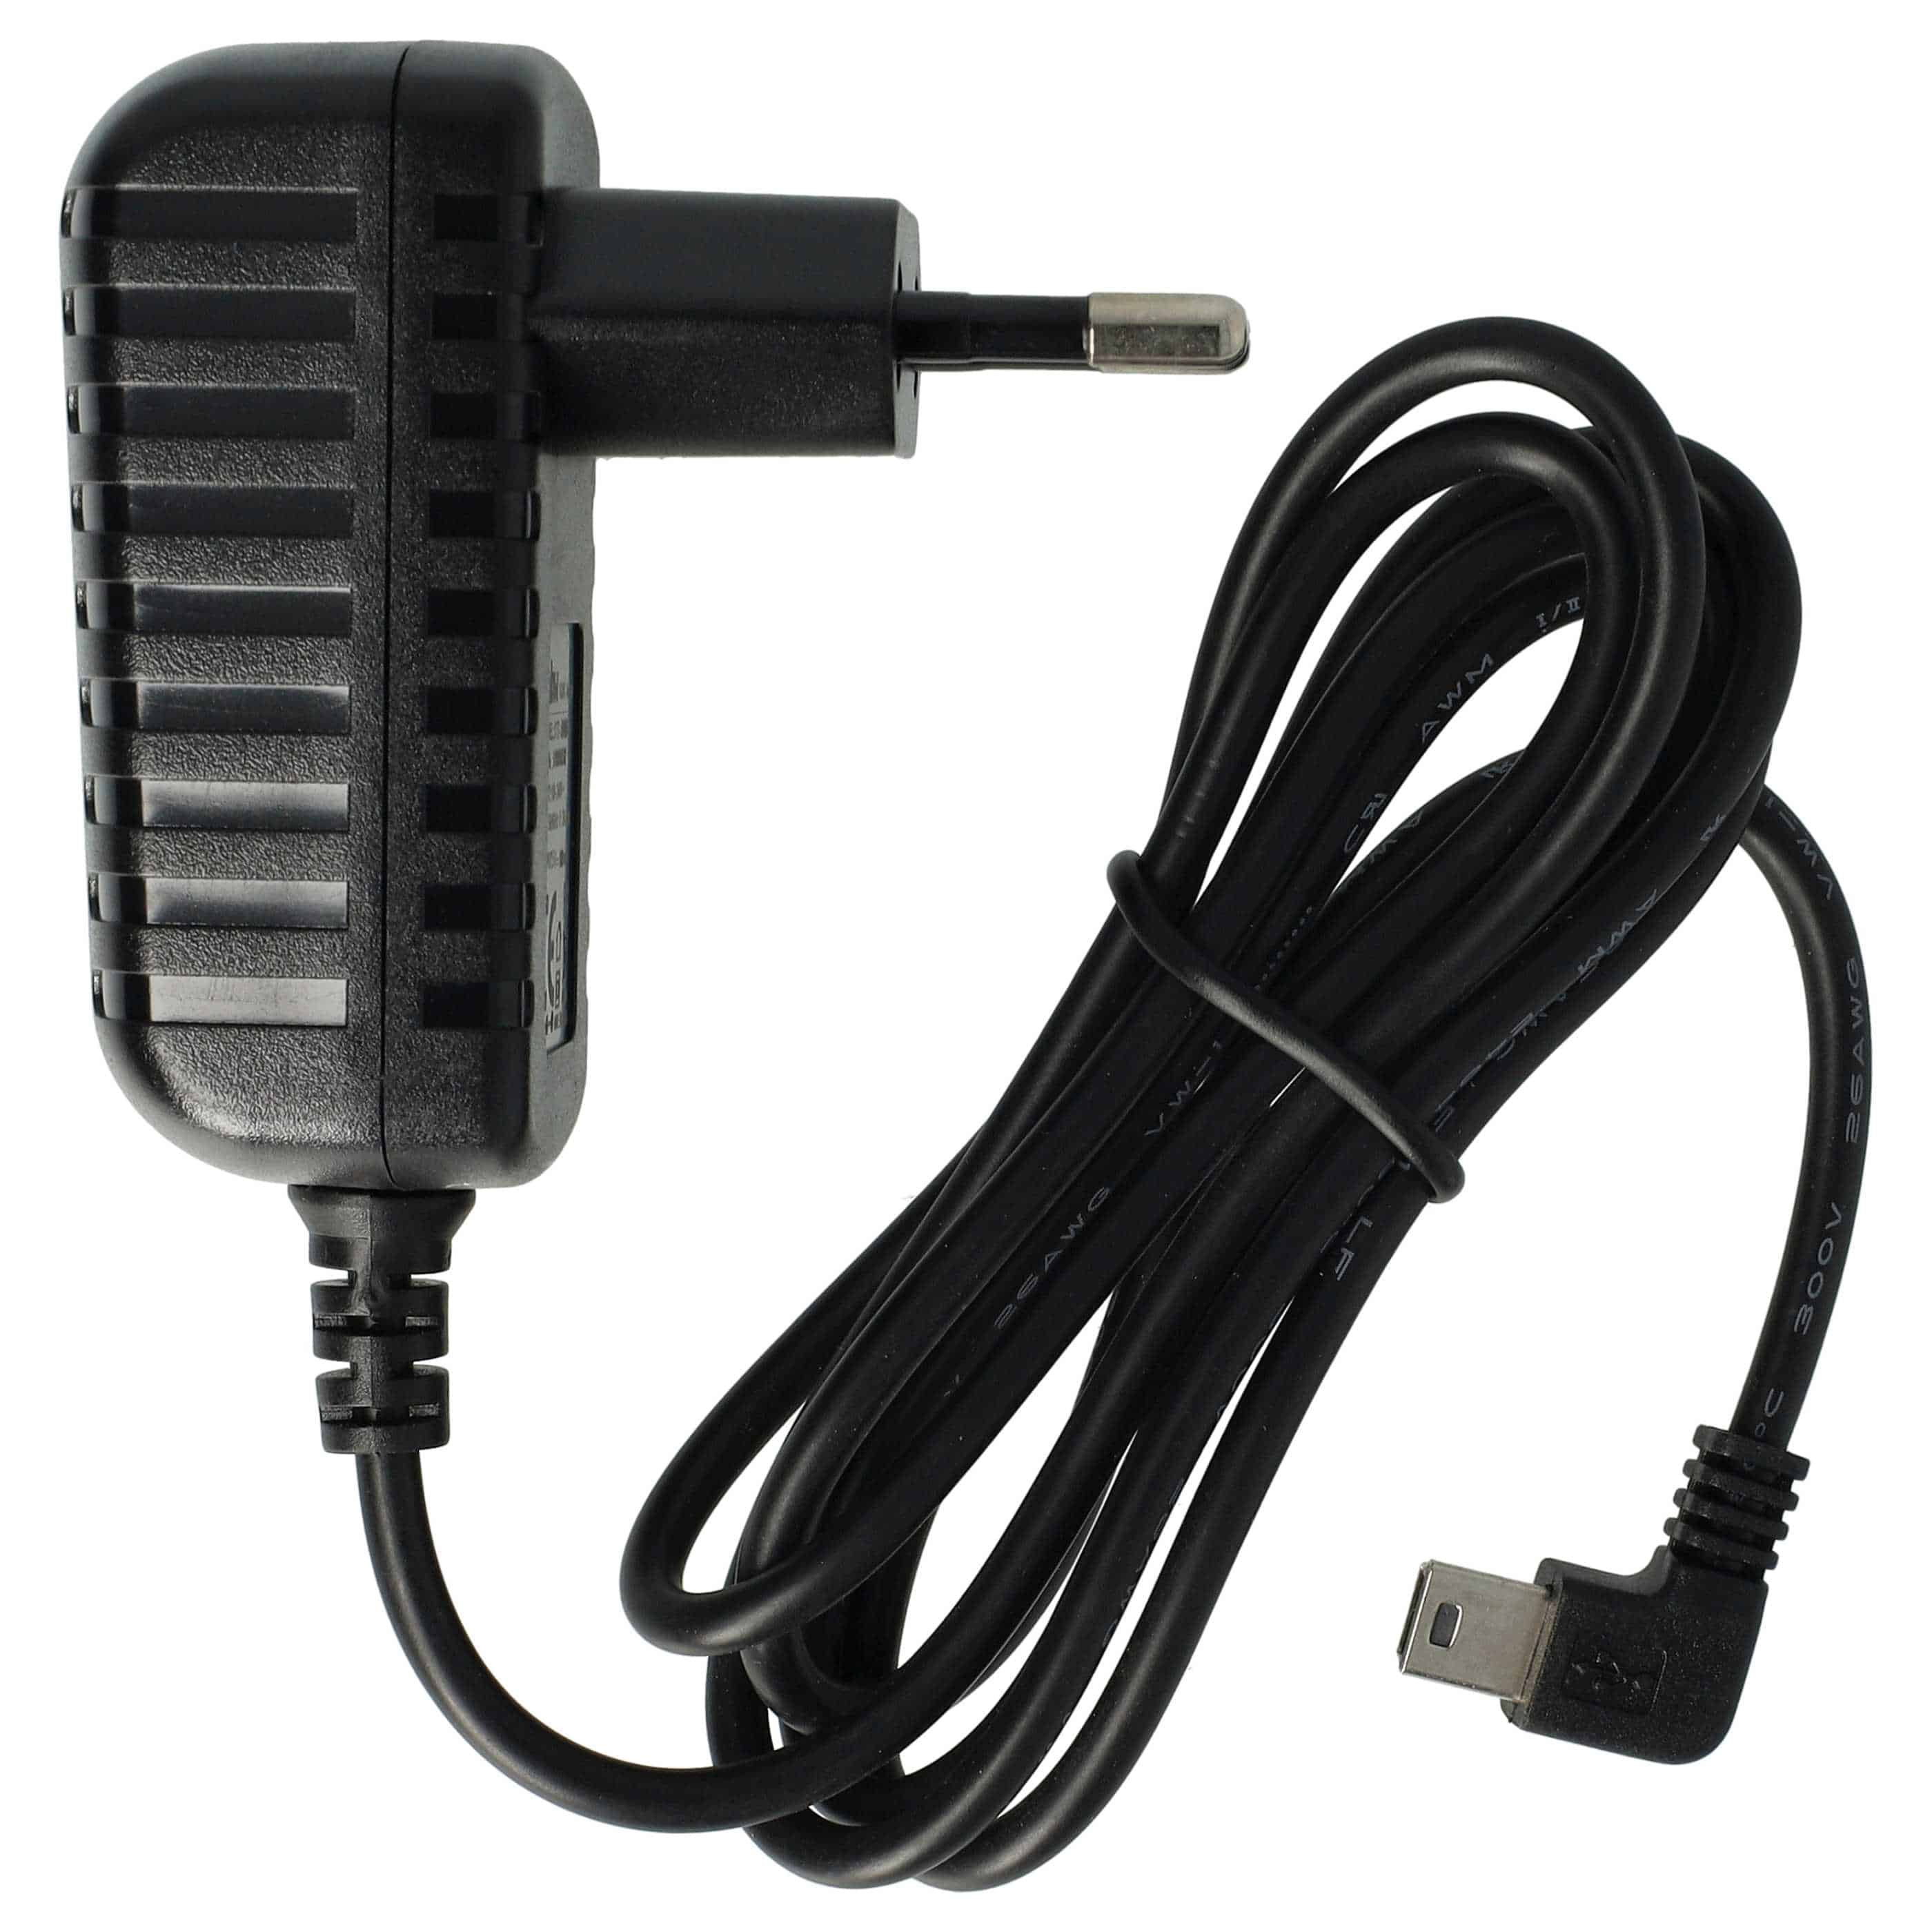 Charger suitable forvarious Navigation Device - 1.0 A